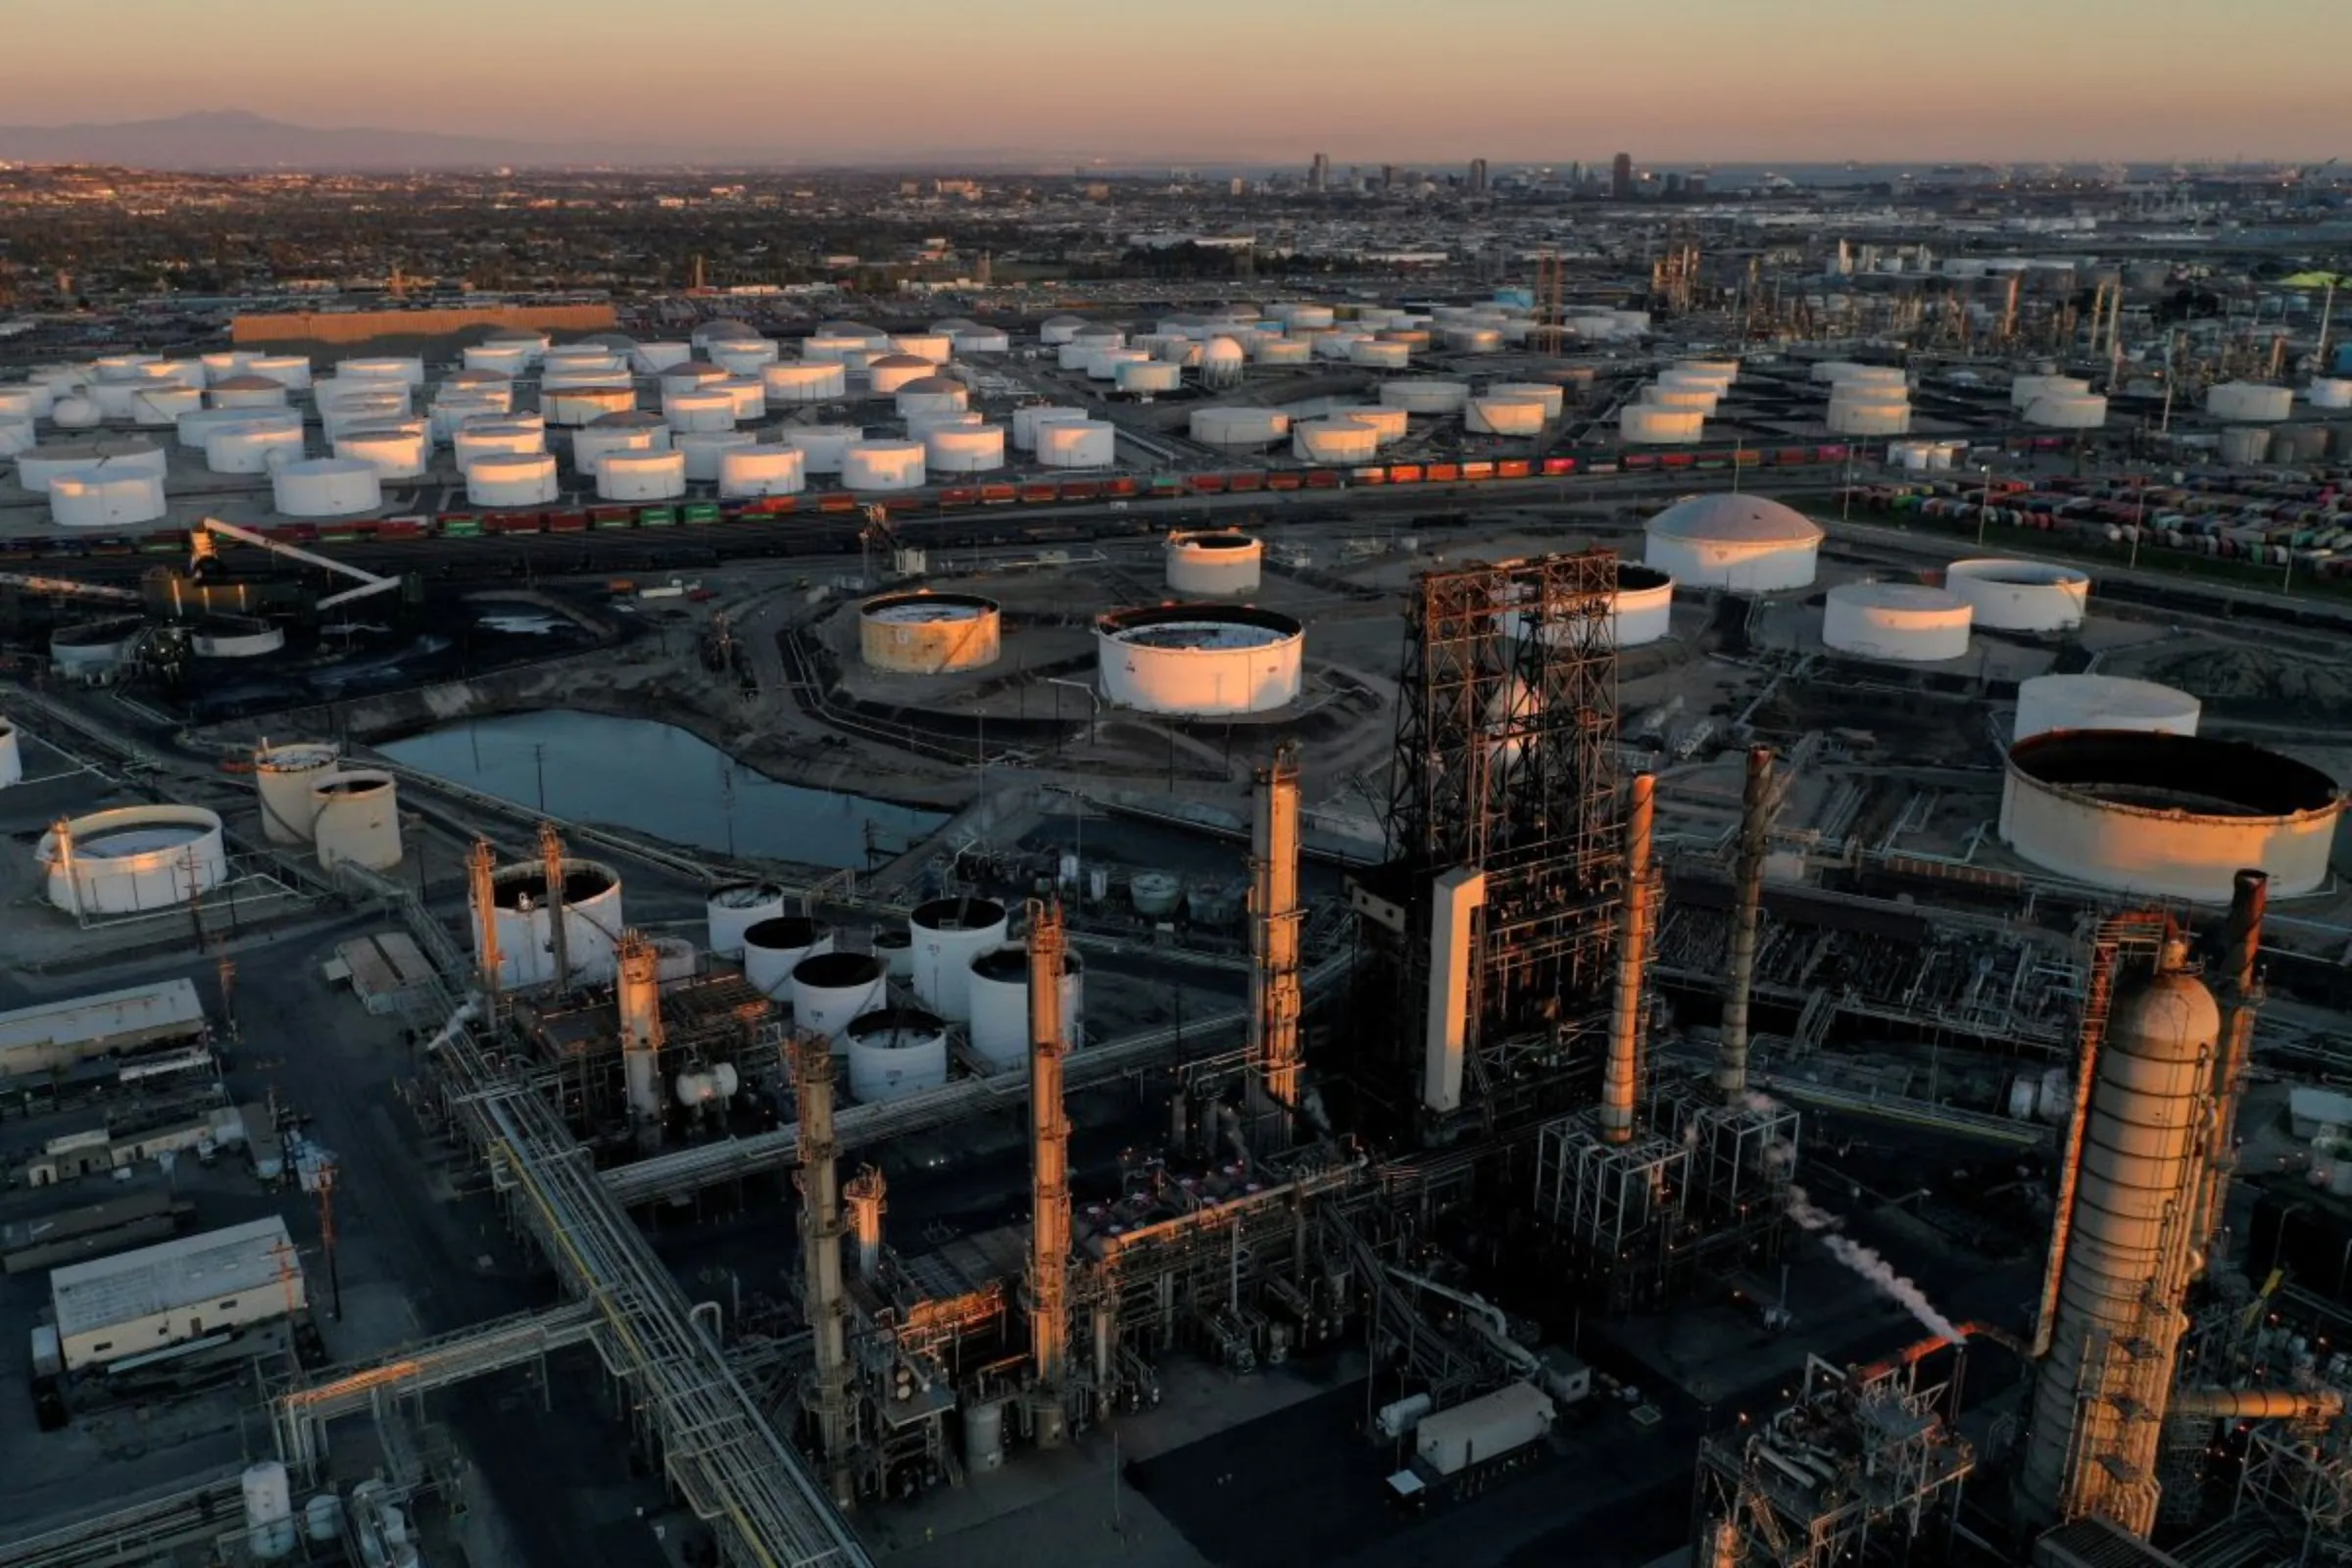 A view of the Phillips 66 Company's Los Angeles Refinery (foreground), which processes domestic & imported crude oil into gasoline, aviation and diesel fuels, and storage tanks for refined petroleum products at the Kinder Morgan Carson Terminal (background), at sunset in Carson, California, U.S., March 11, 2022. Picture taken with a drone. REUTERS/Bing Guan